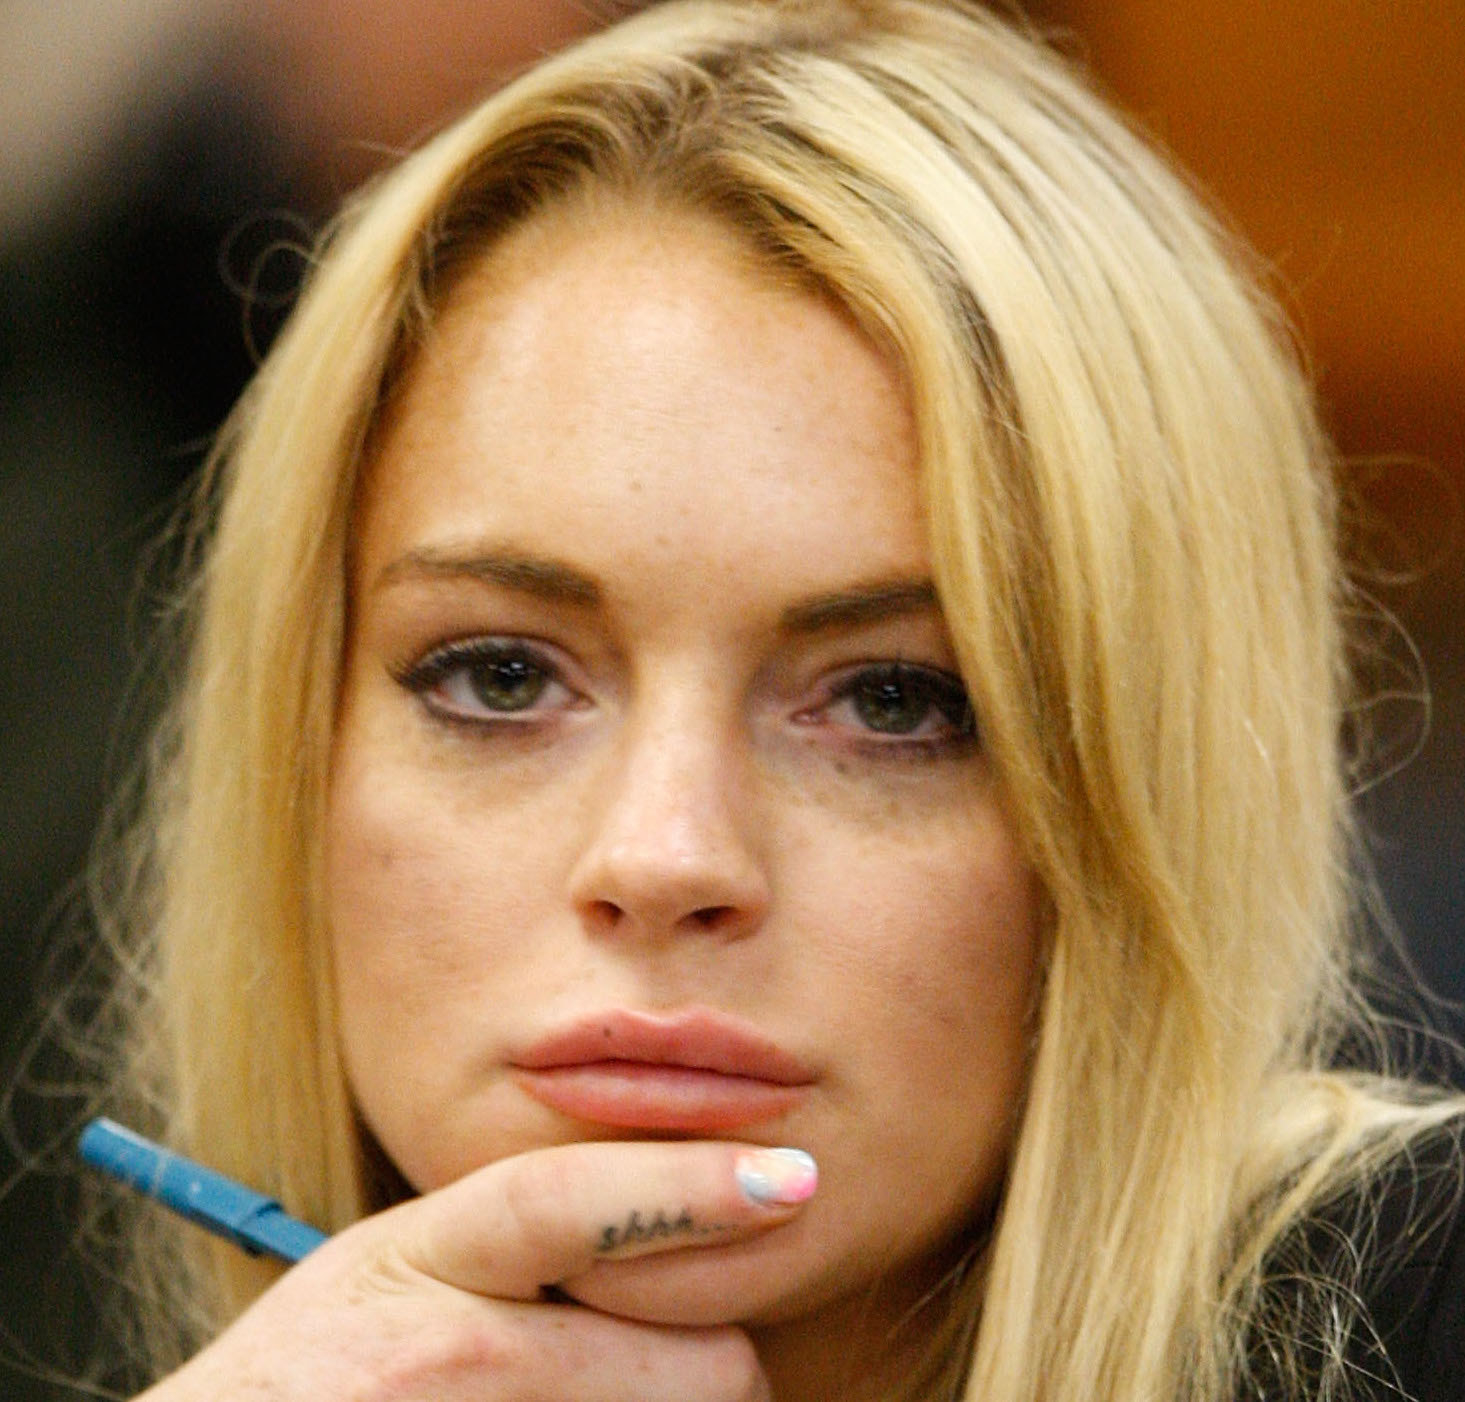 Lindsay with her hand touching her chin and showing the tat on her pointy finger